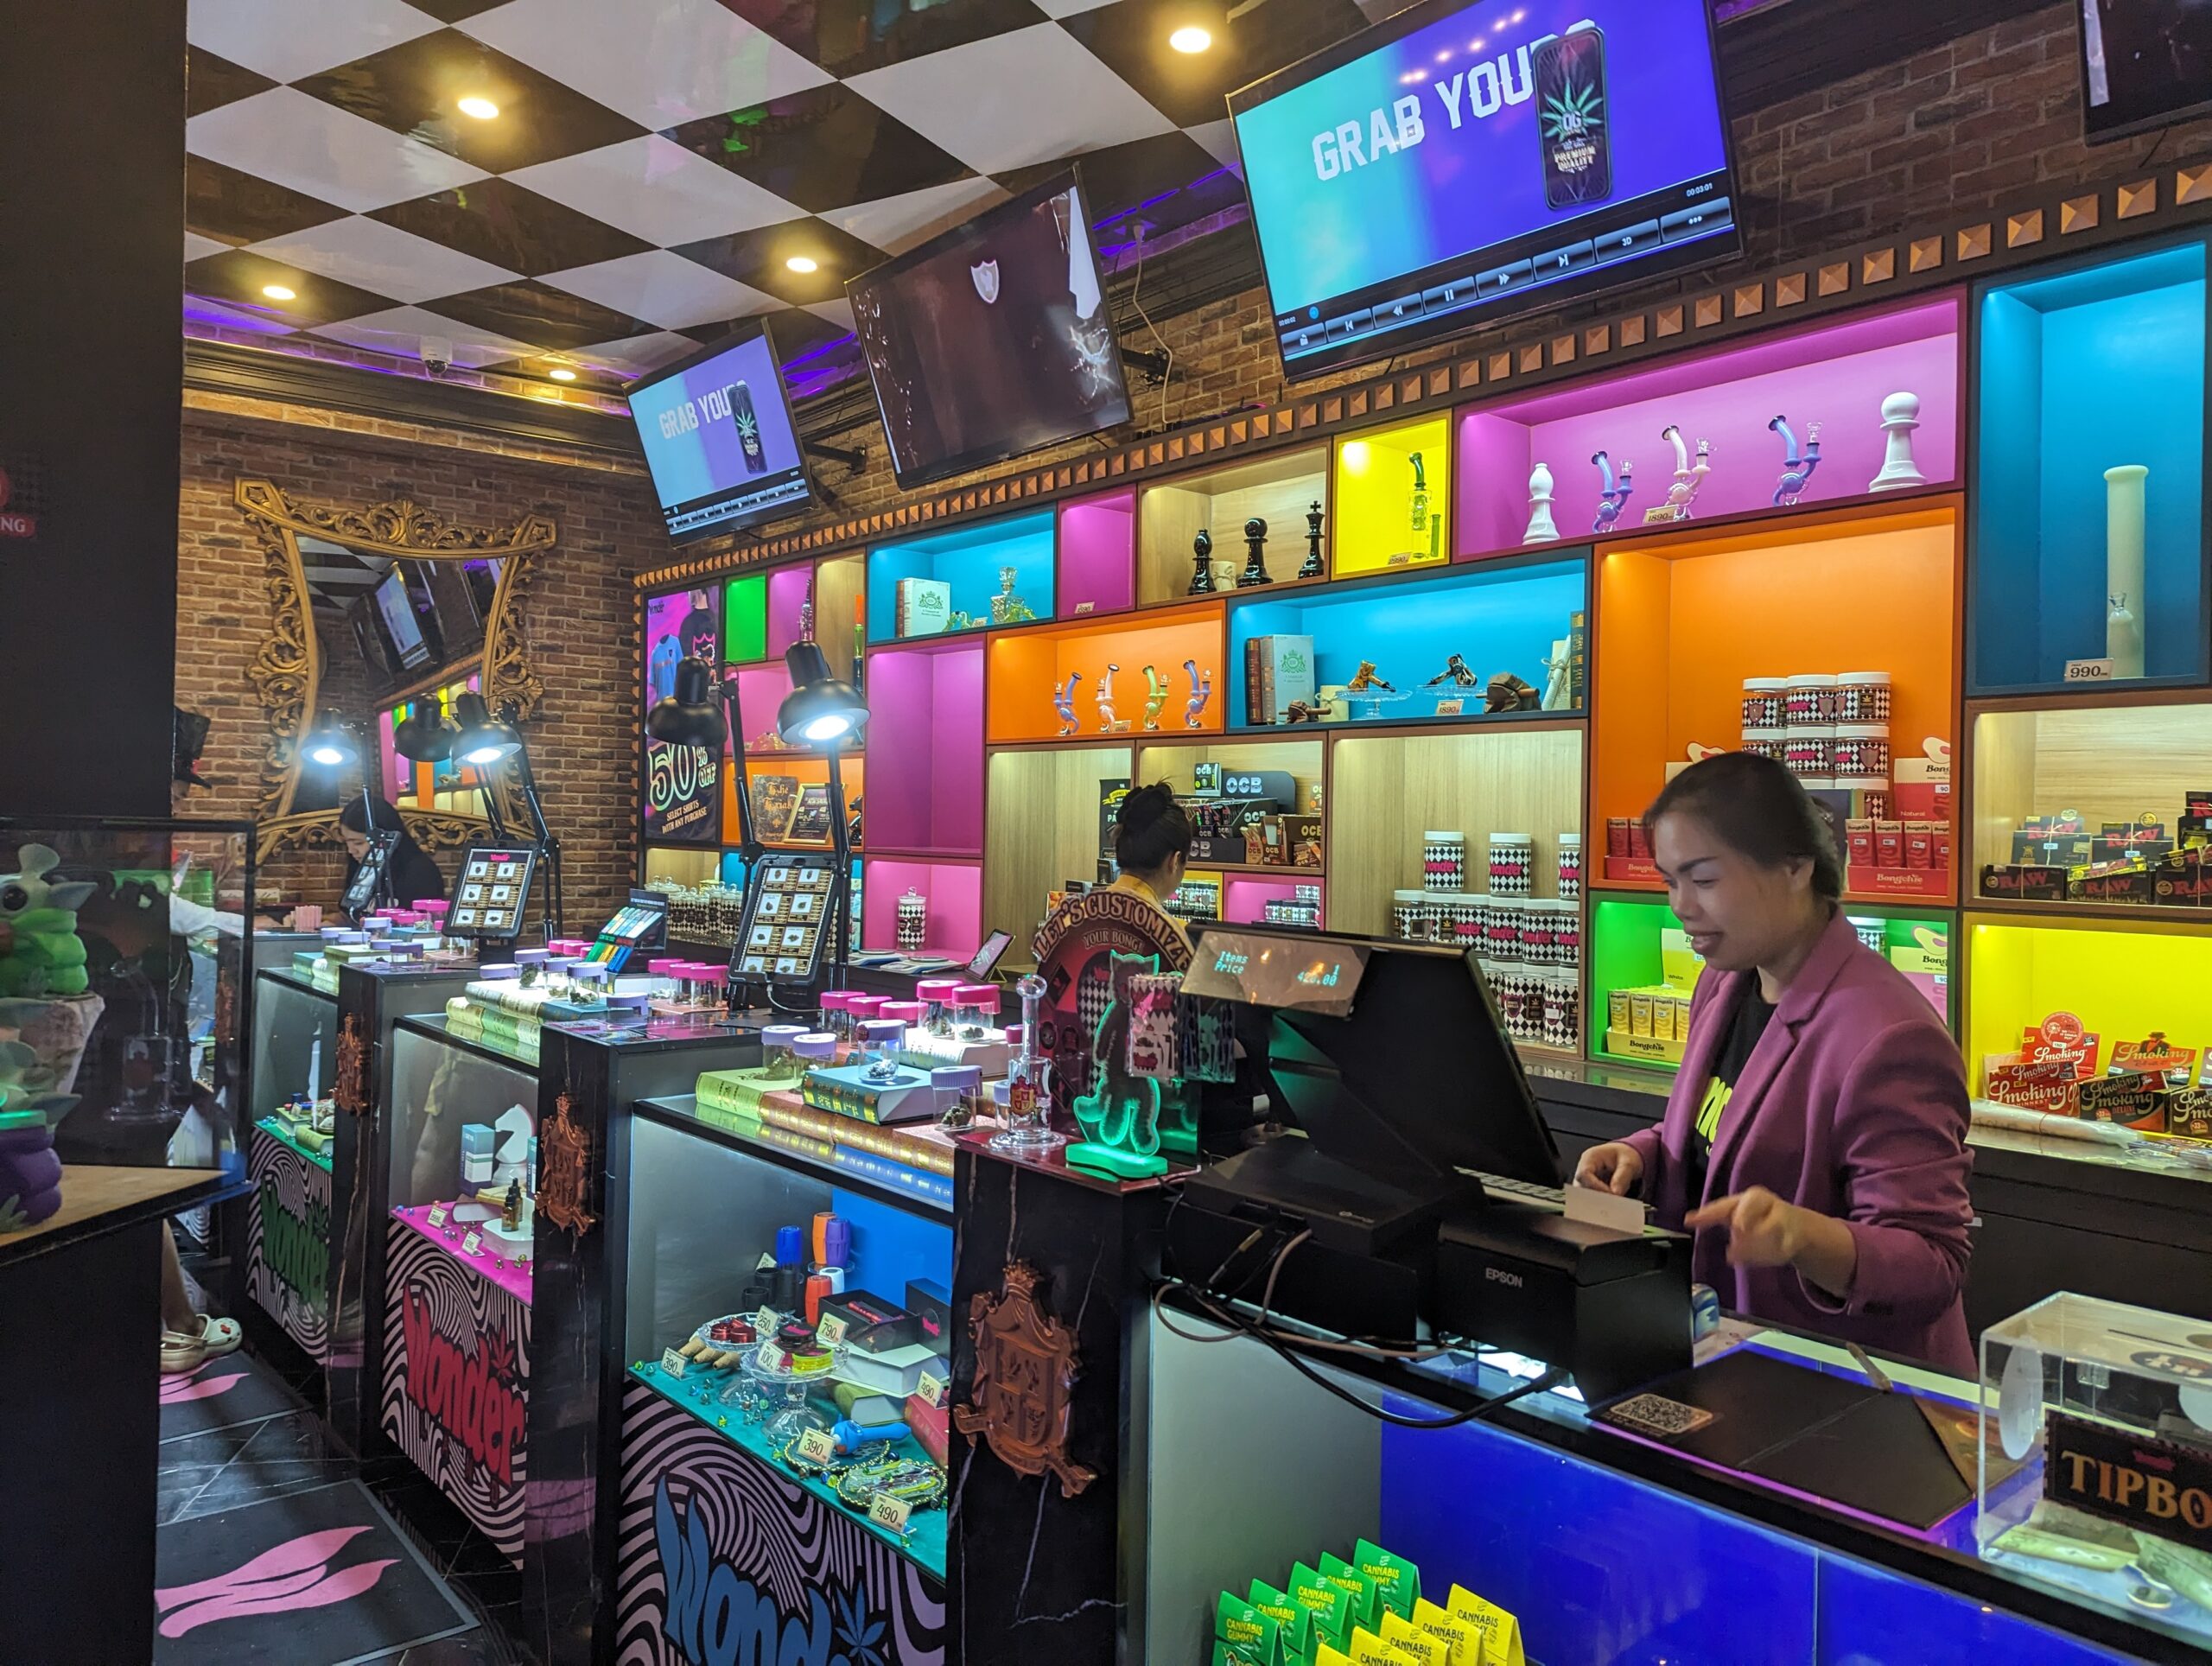 A cannabis shop with many bongs, gadgets, and fun knick-knacks to mirror Alice in Wonderland. Located in Bangkok.